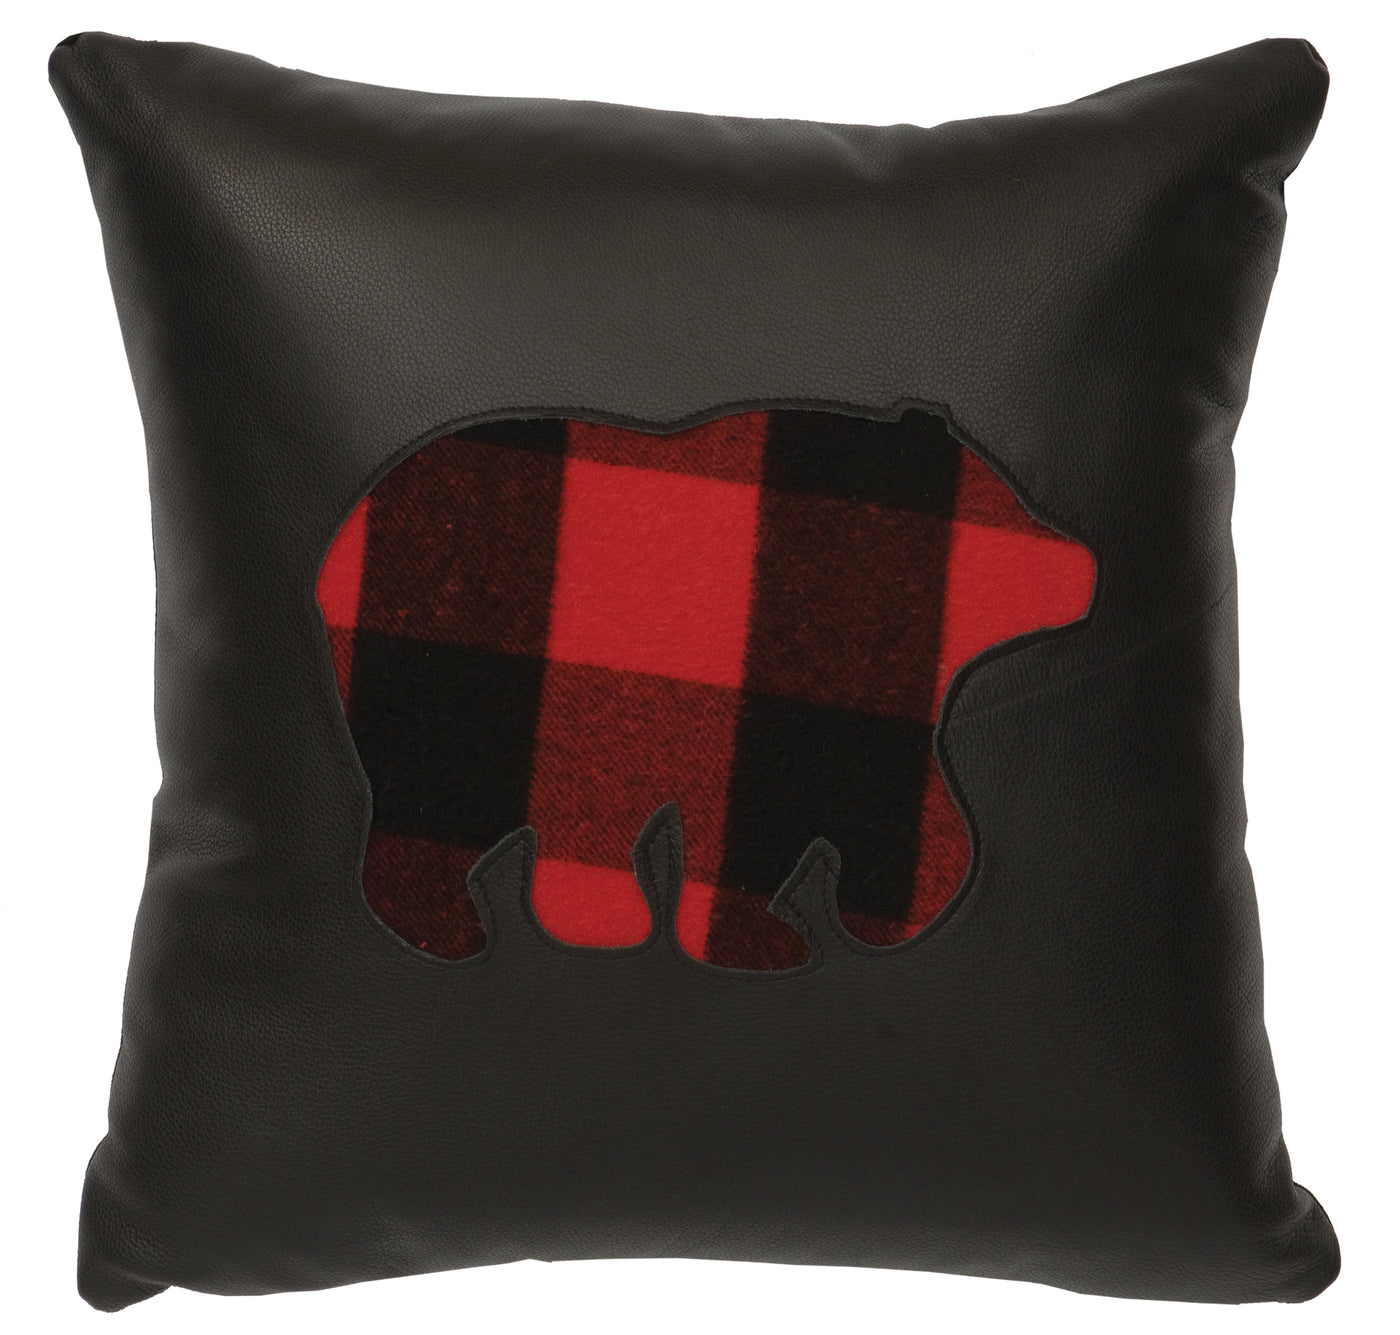 Canvello Black Leather Pillow - Leather Back - 18"x18"